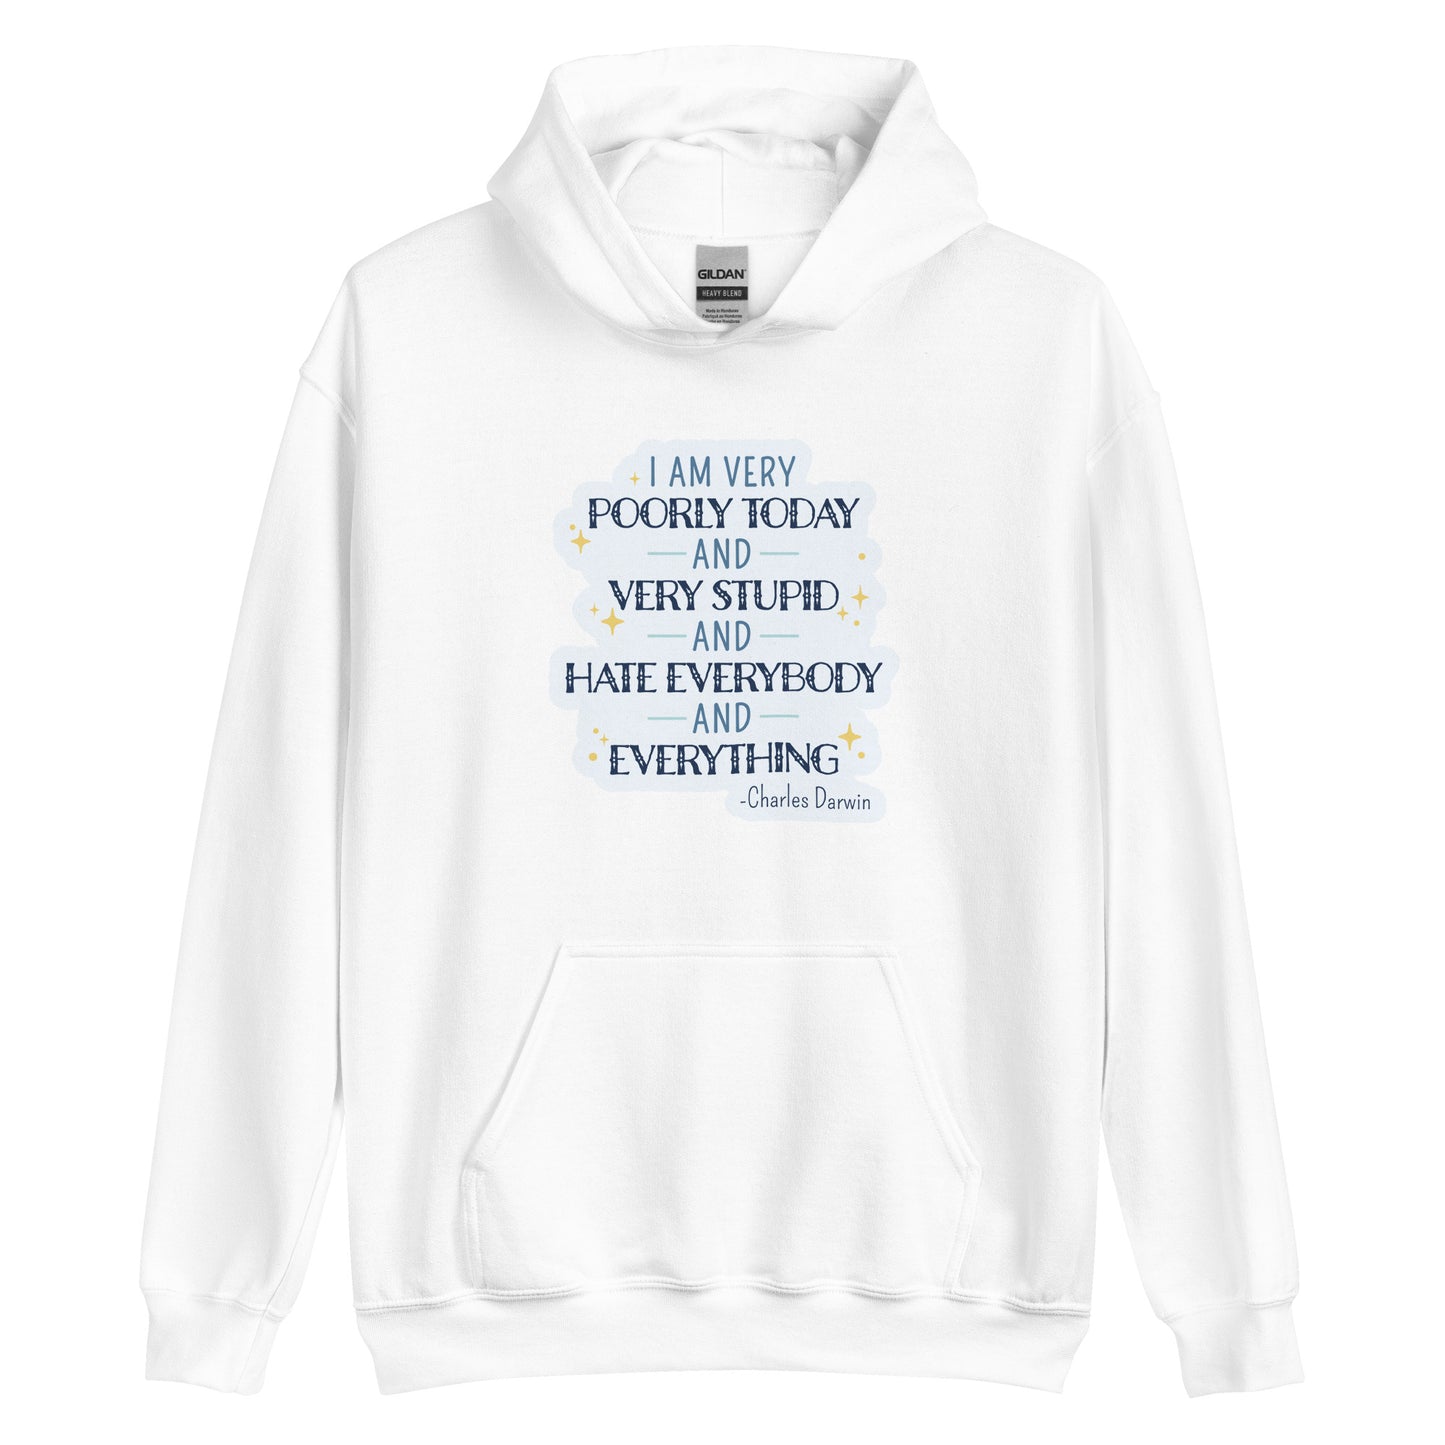 A white hooded sweatshirt featuring a quote from Charles Darwin in blue text. The quote reads "I am very poorly today and very stupid and hate everybody and everything".